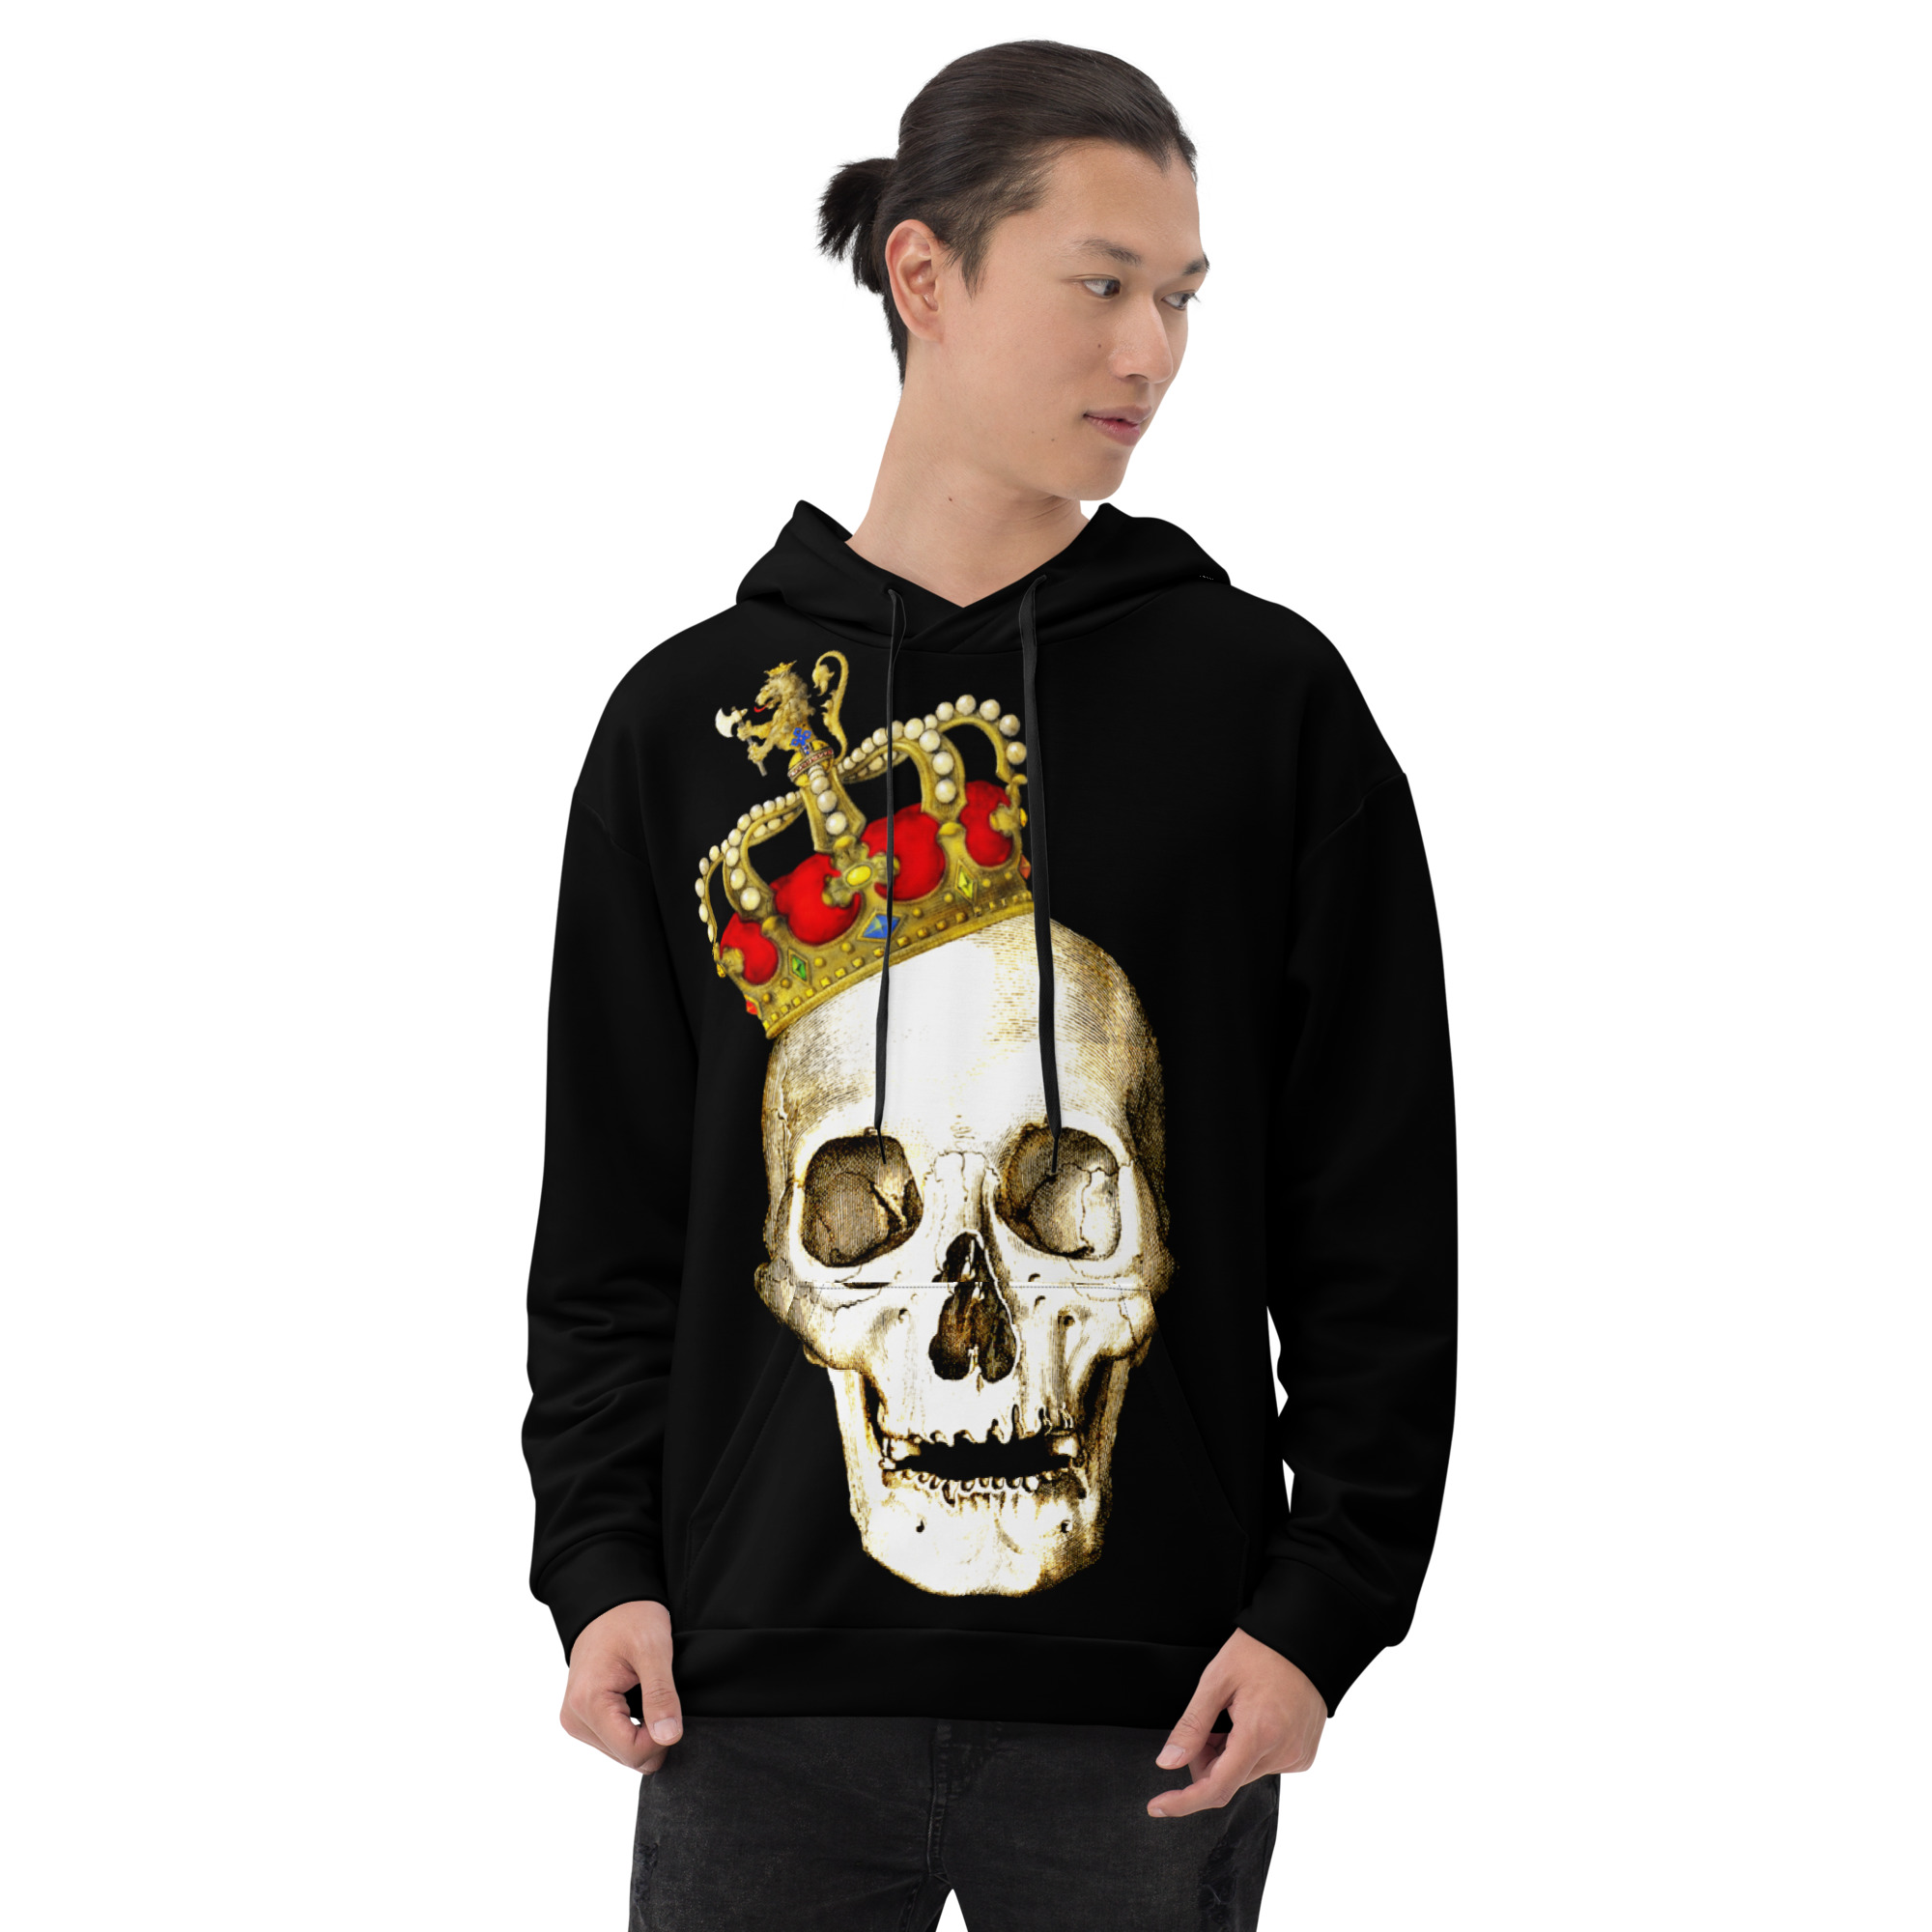 all-over-print-unisex-hoodie-white-front-644053b64a0a4.jpg